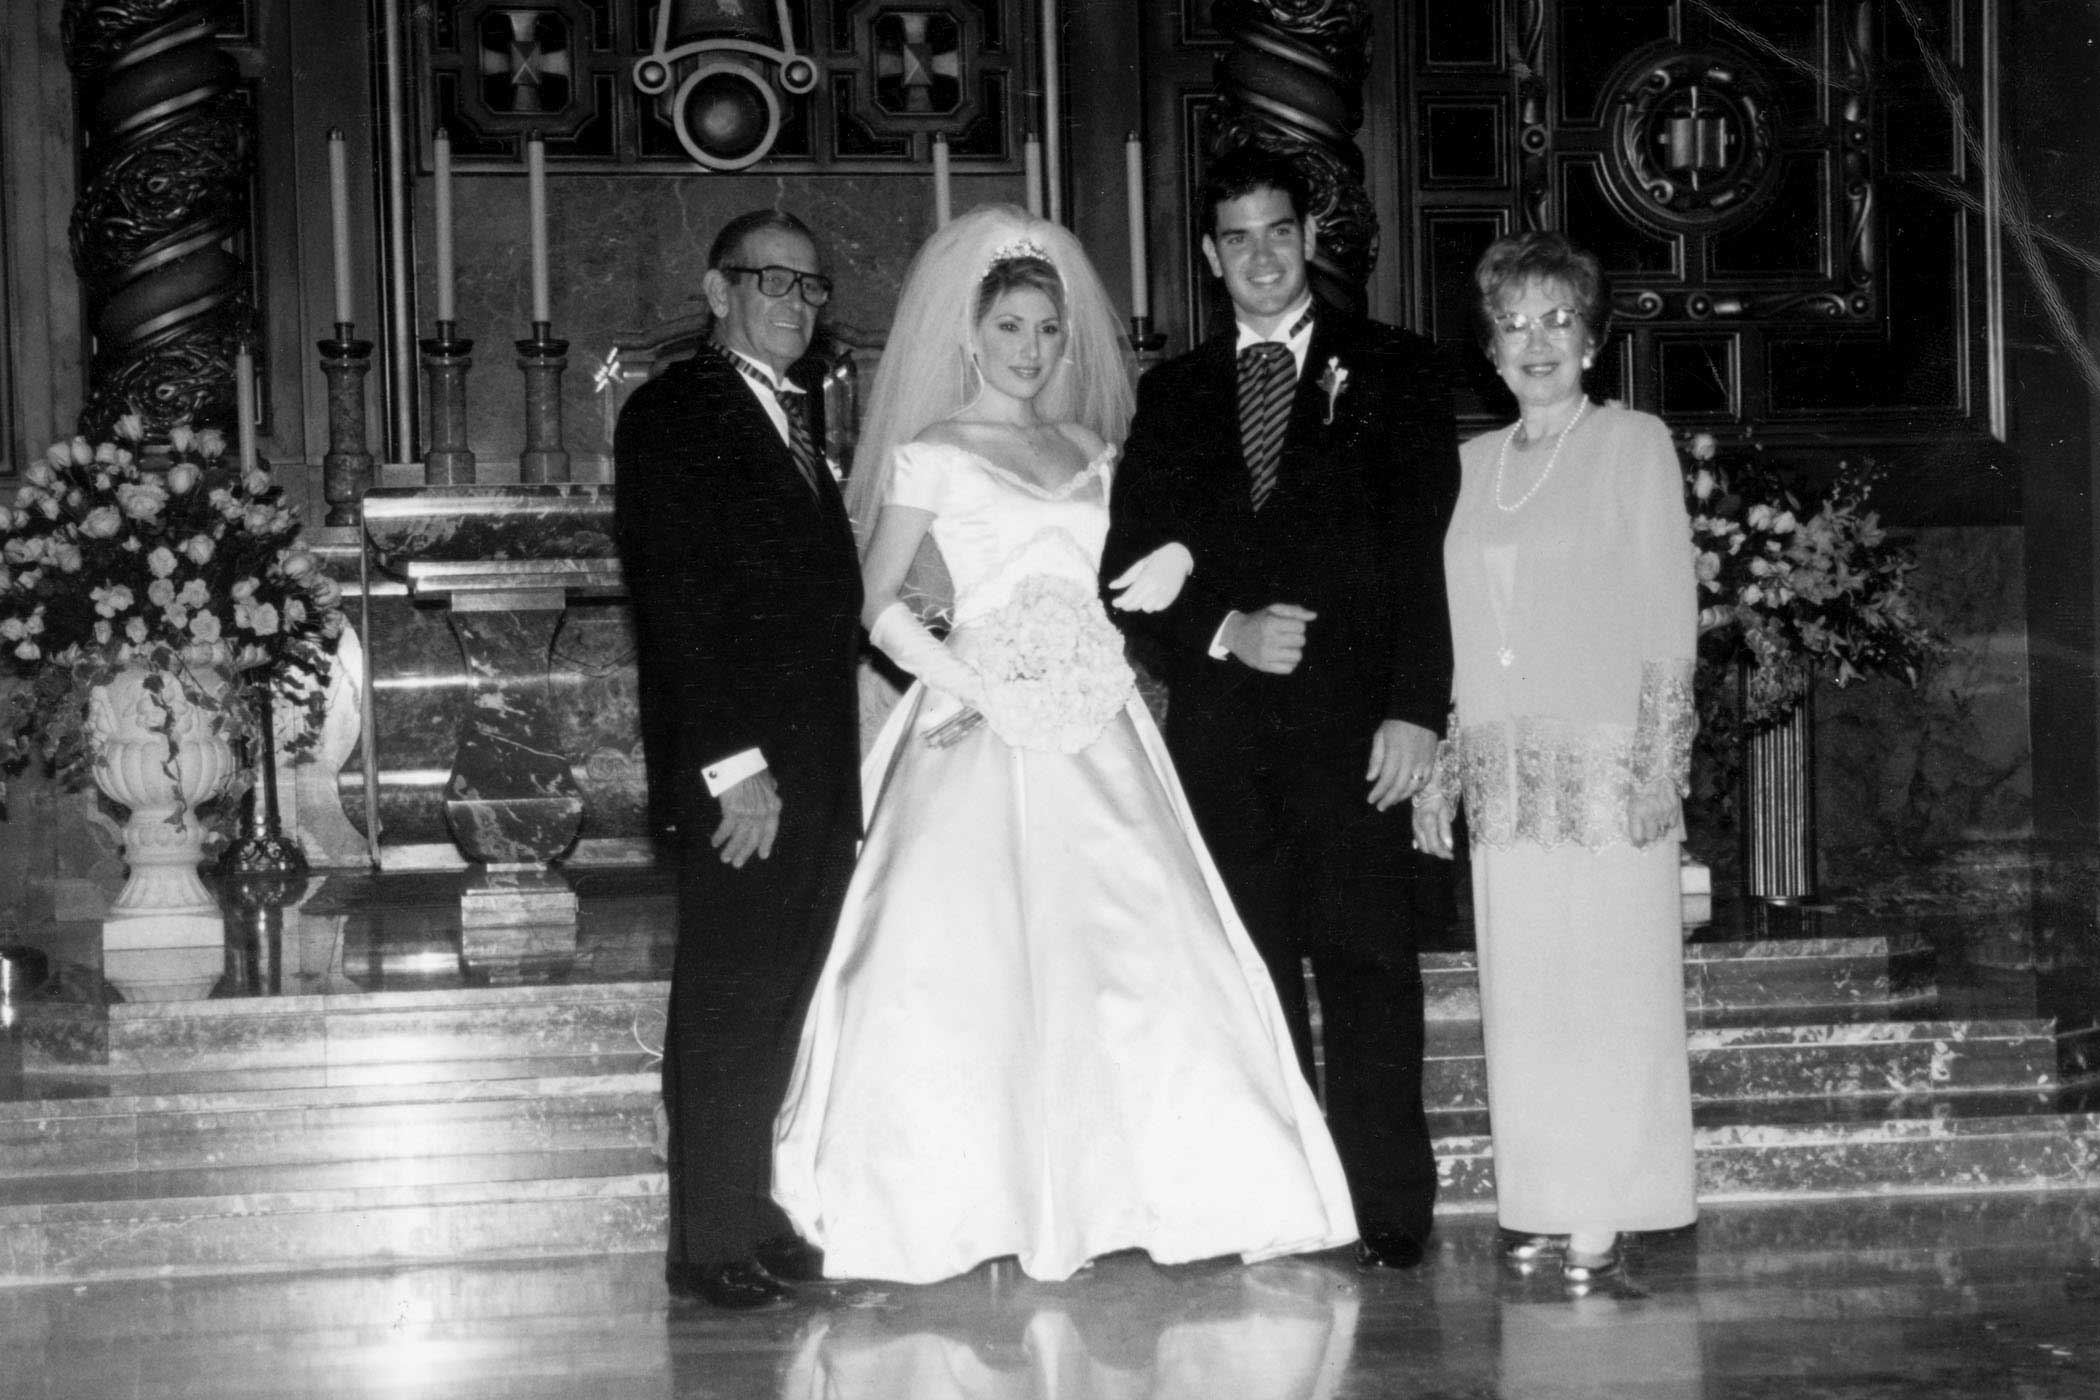 Marco Rubio with his wife, Jeanette and his parents on his wedding day on Oct. 17, 1998.